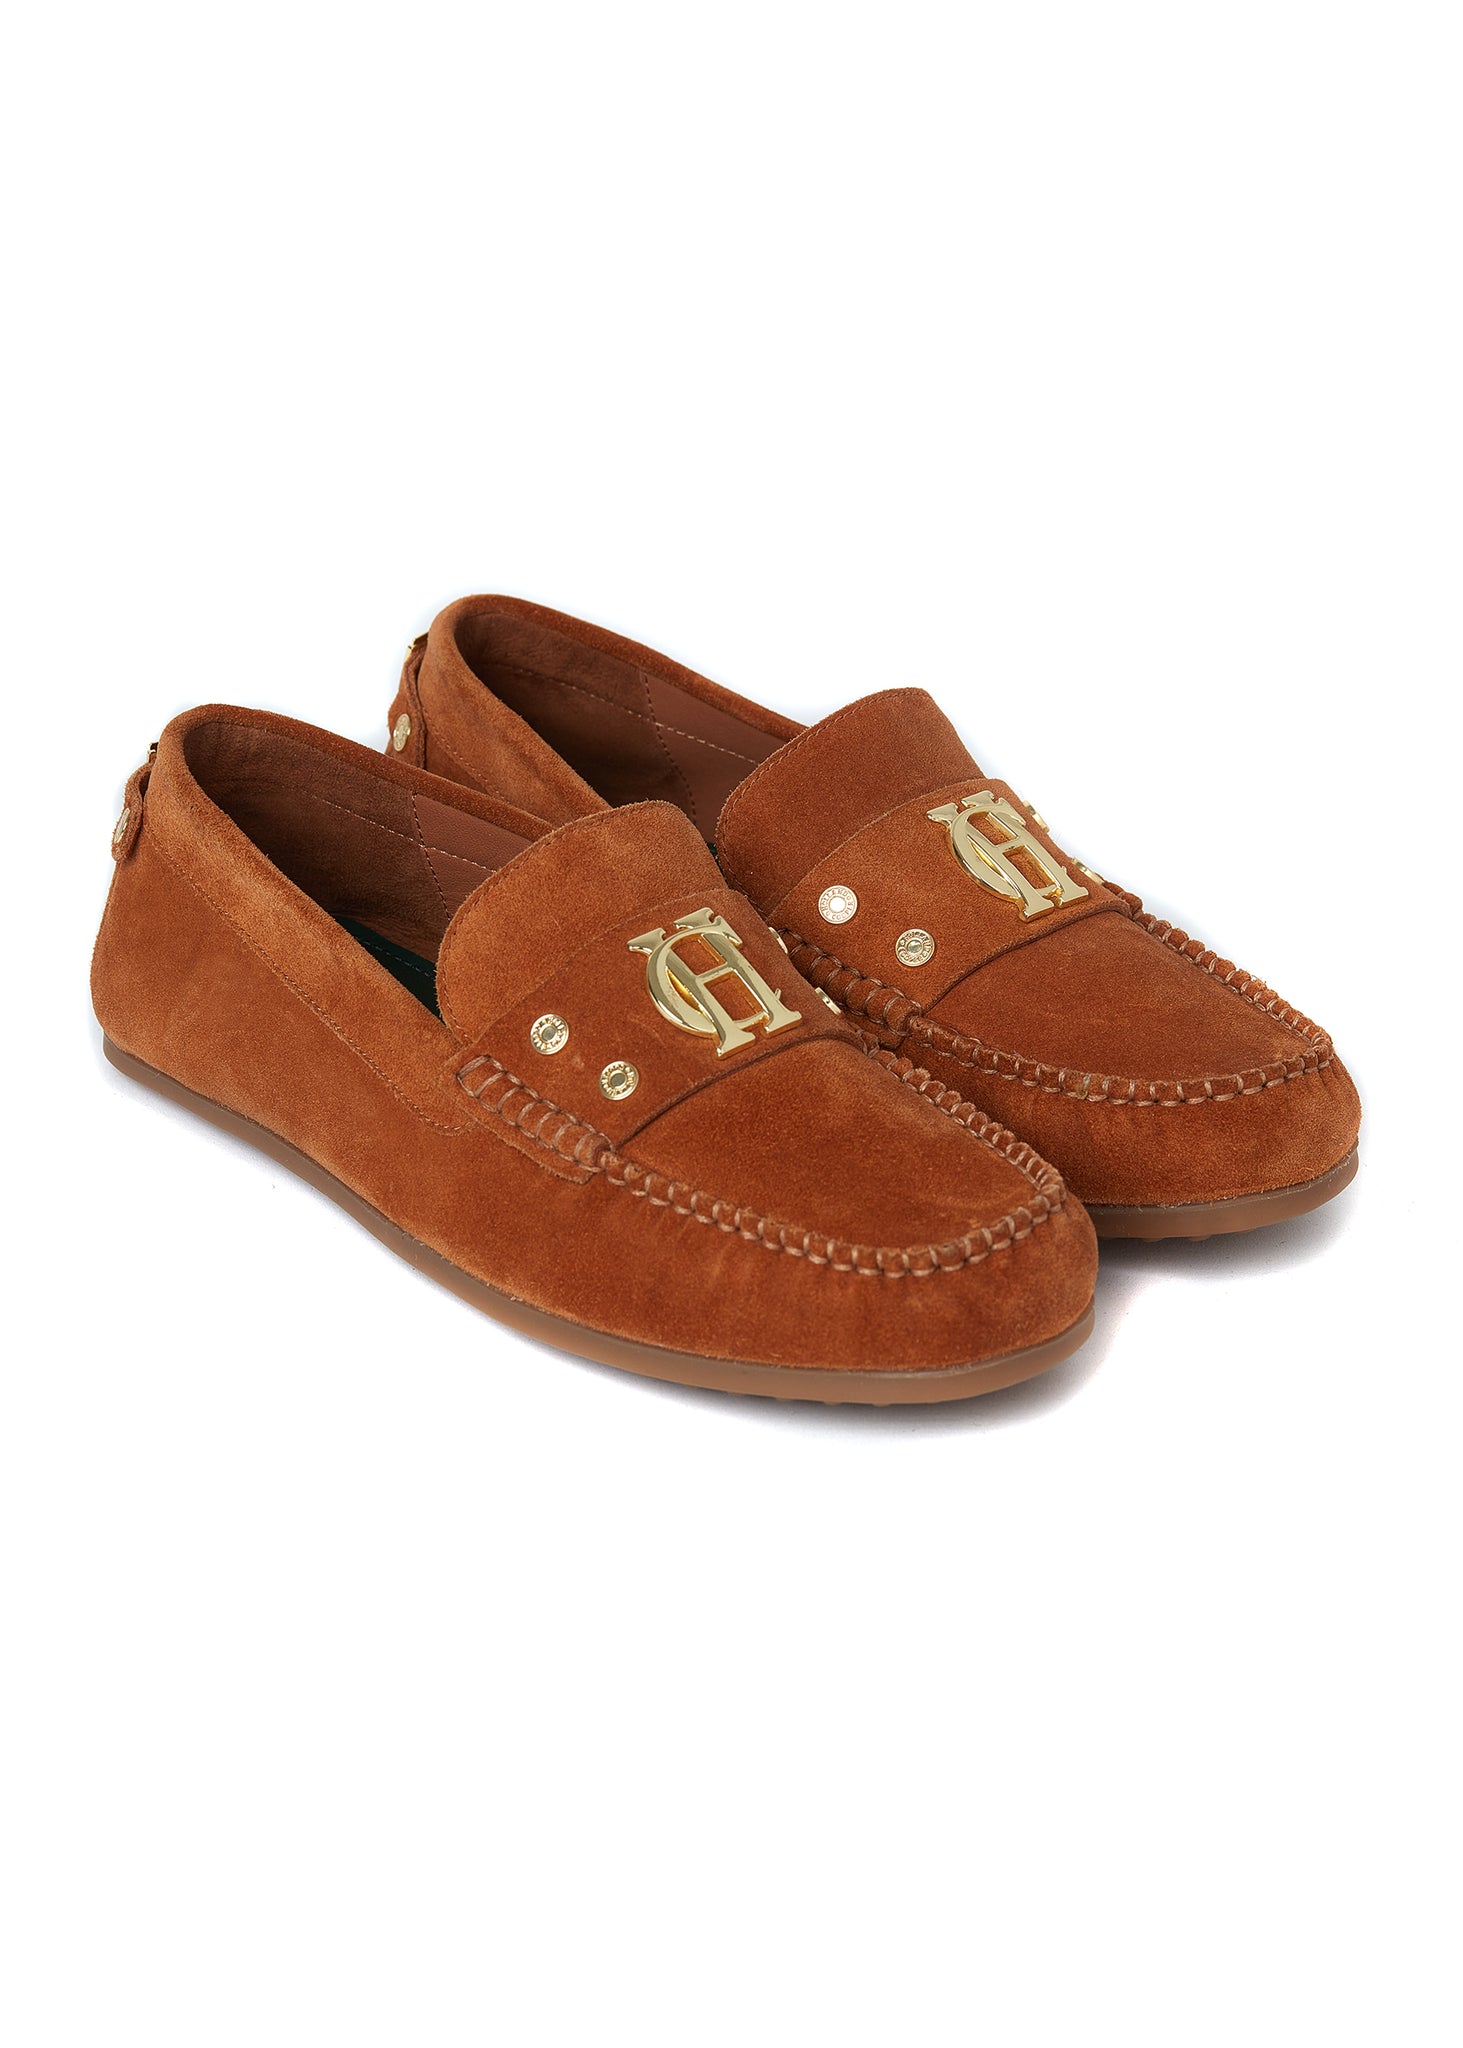 classic tan suede loafers with a leather sole and top stitching details and gold hardware 